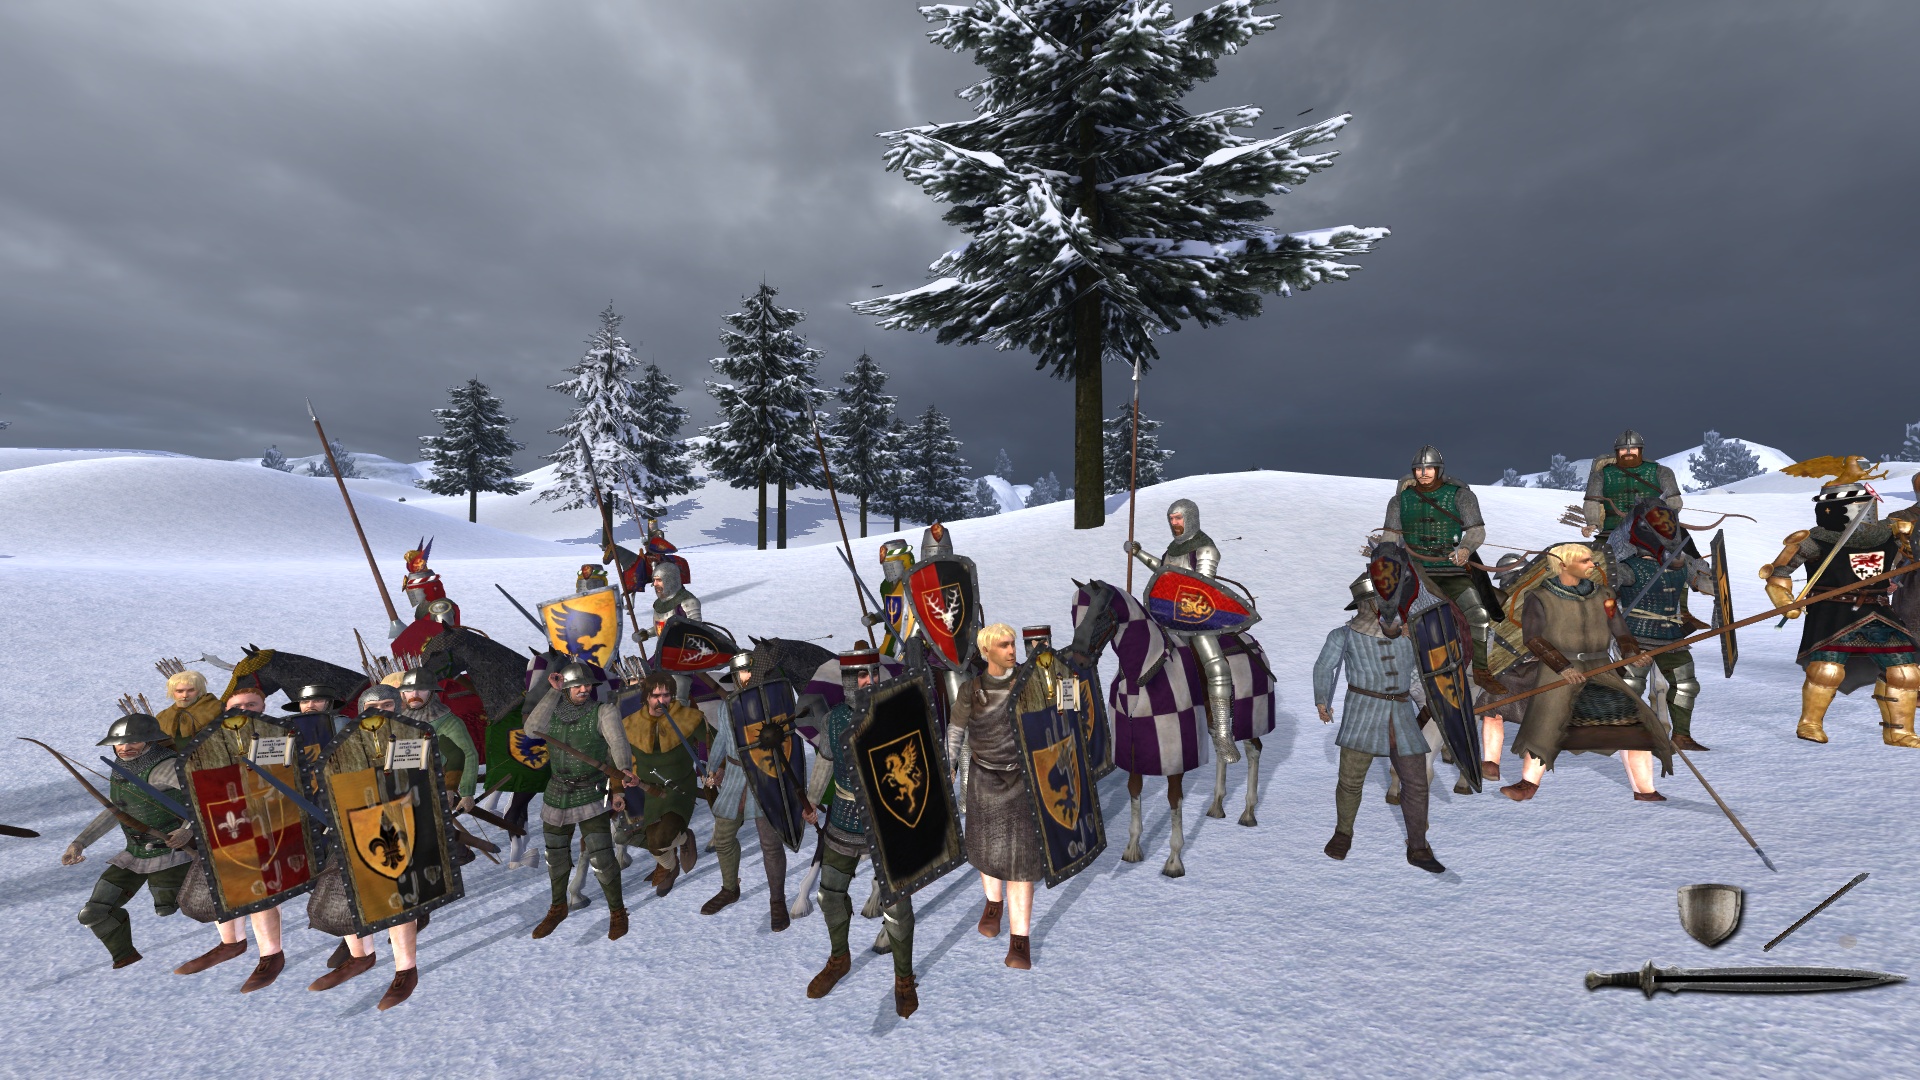 Warband warsword conquest. Mount and Blade Warsword Conquest. Mount and Blade Warband Warsword Conquest. Warband Warsword Conquest Неехара.